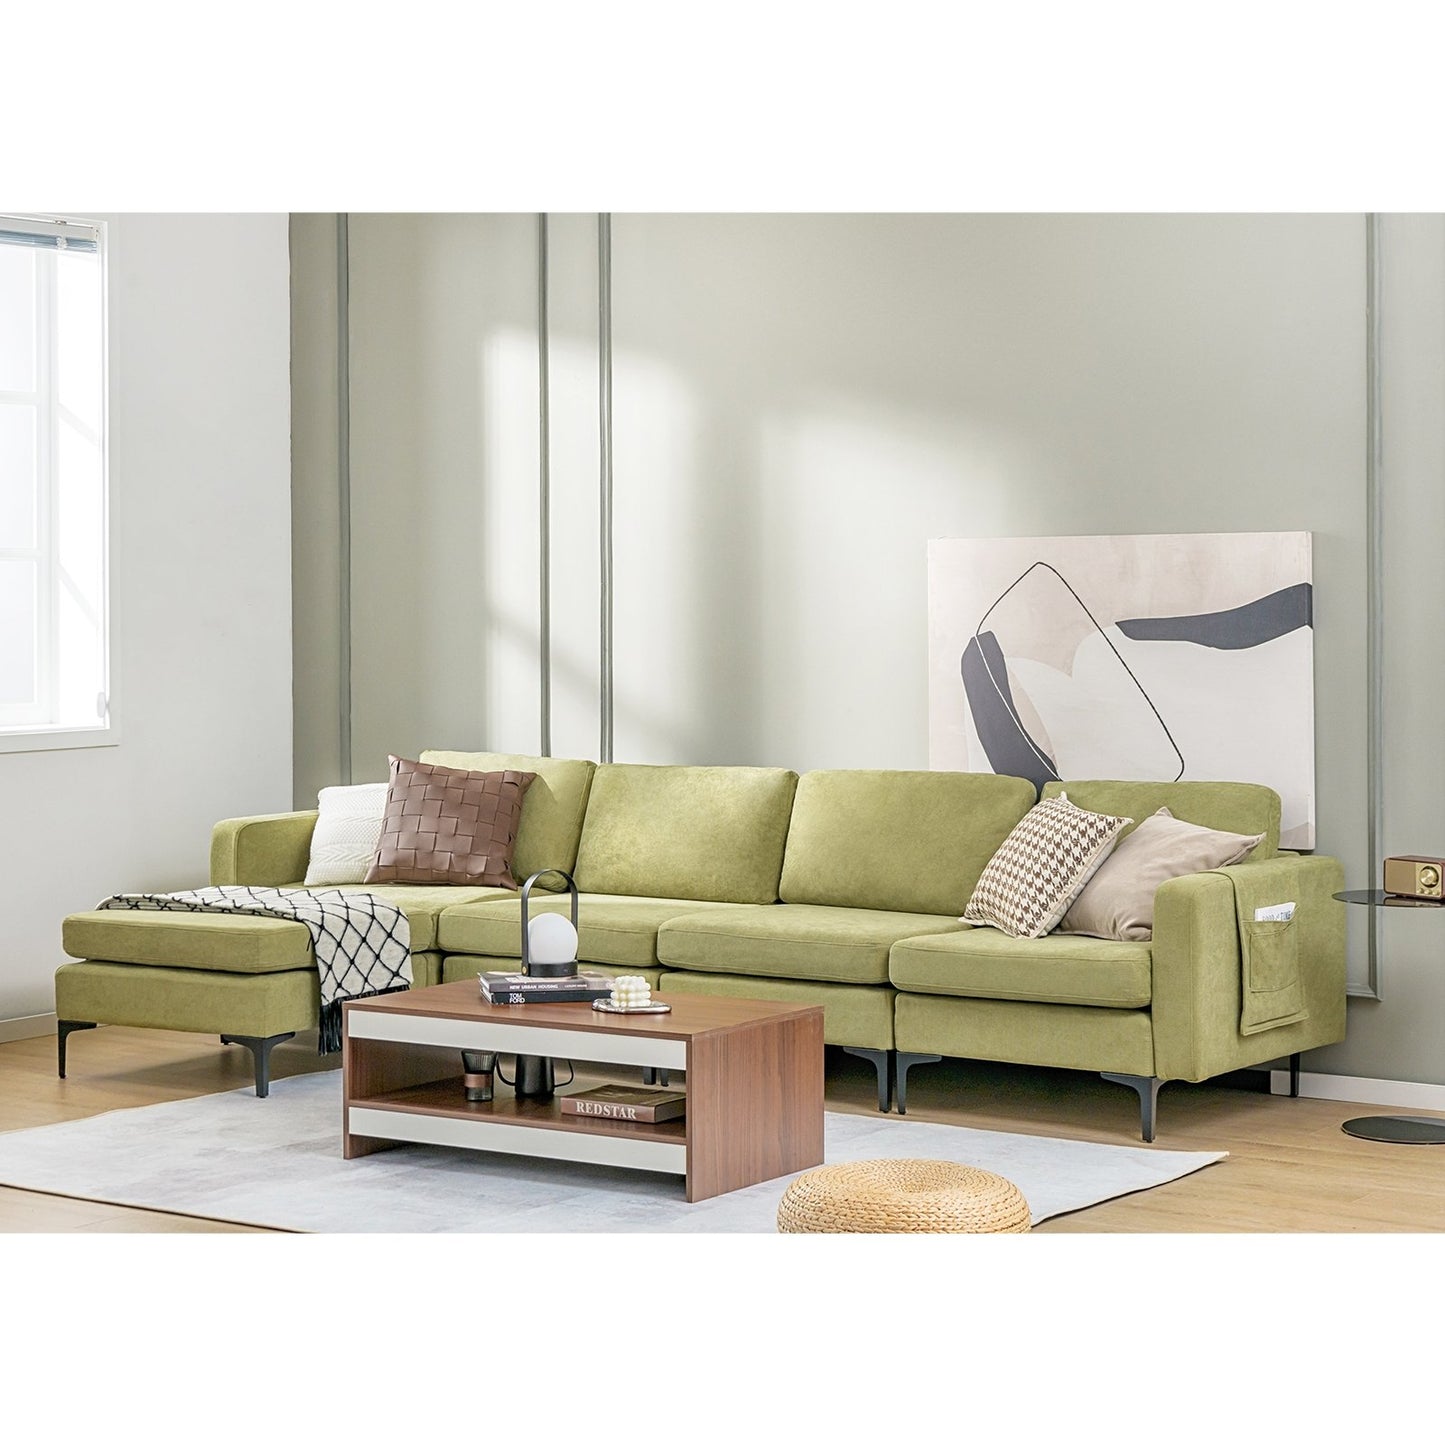 Modular L-shaped Sectional Sofa with Reversible Ottoman and 2 USB Ports, Green